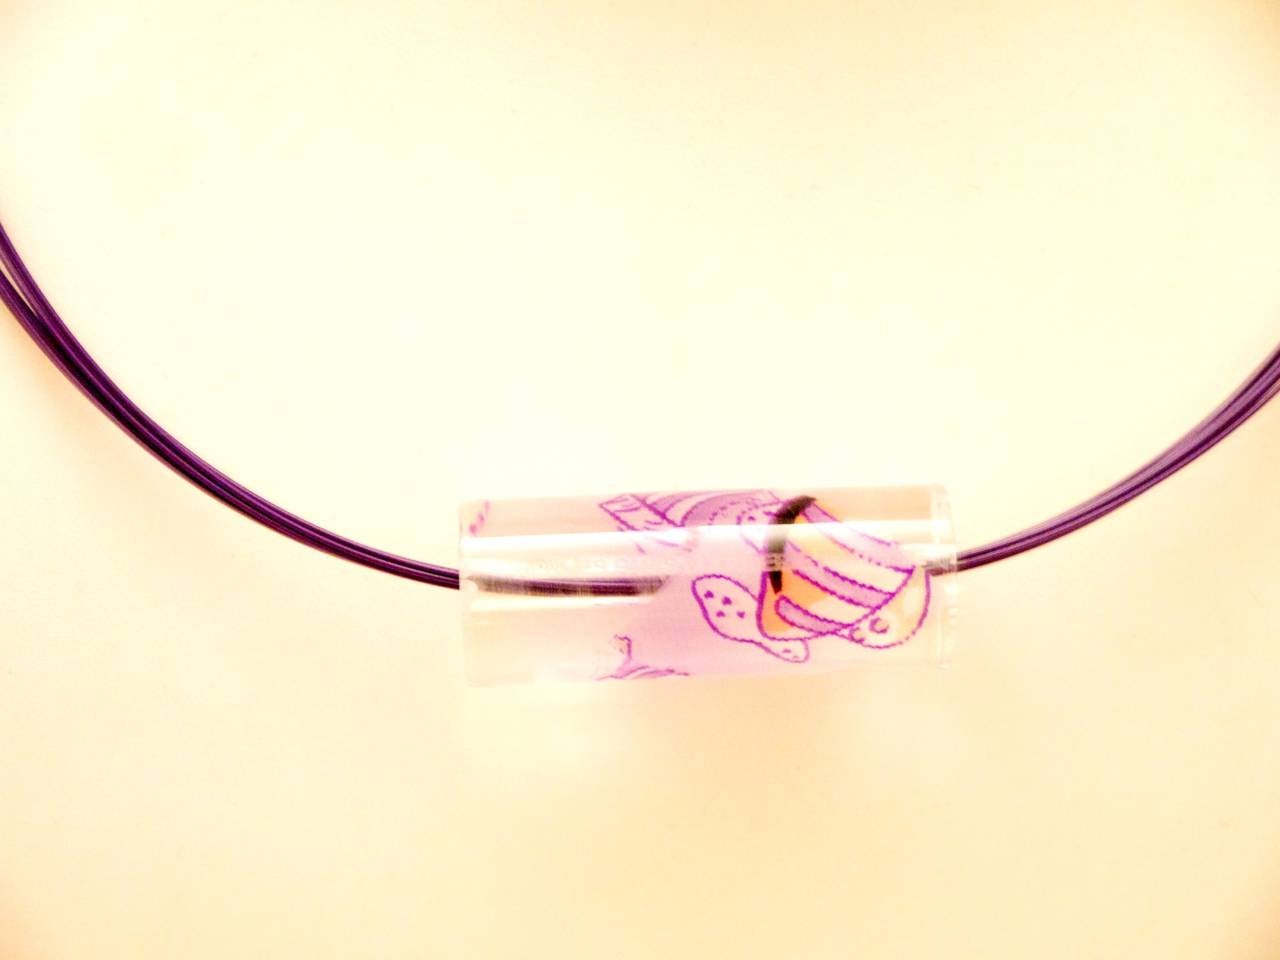 Extremely rare Hermes Purple and clear necklace. Necklace is a lucite cylinder adorned with fish graphics. The necklace strap is comprised of multiple thin plastic cords with a twist clasp enclosure. Total length of necklace strap is 17.6